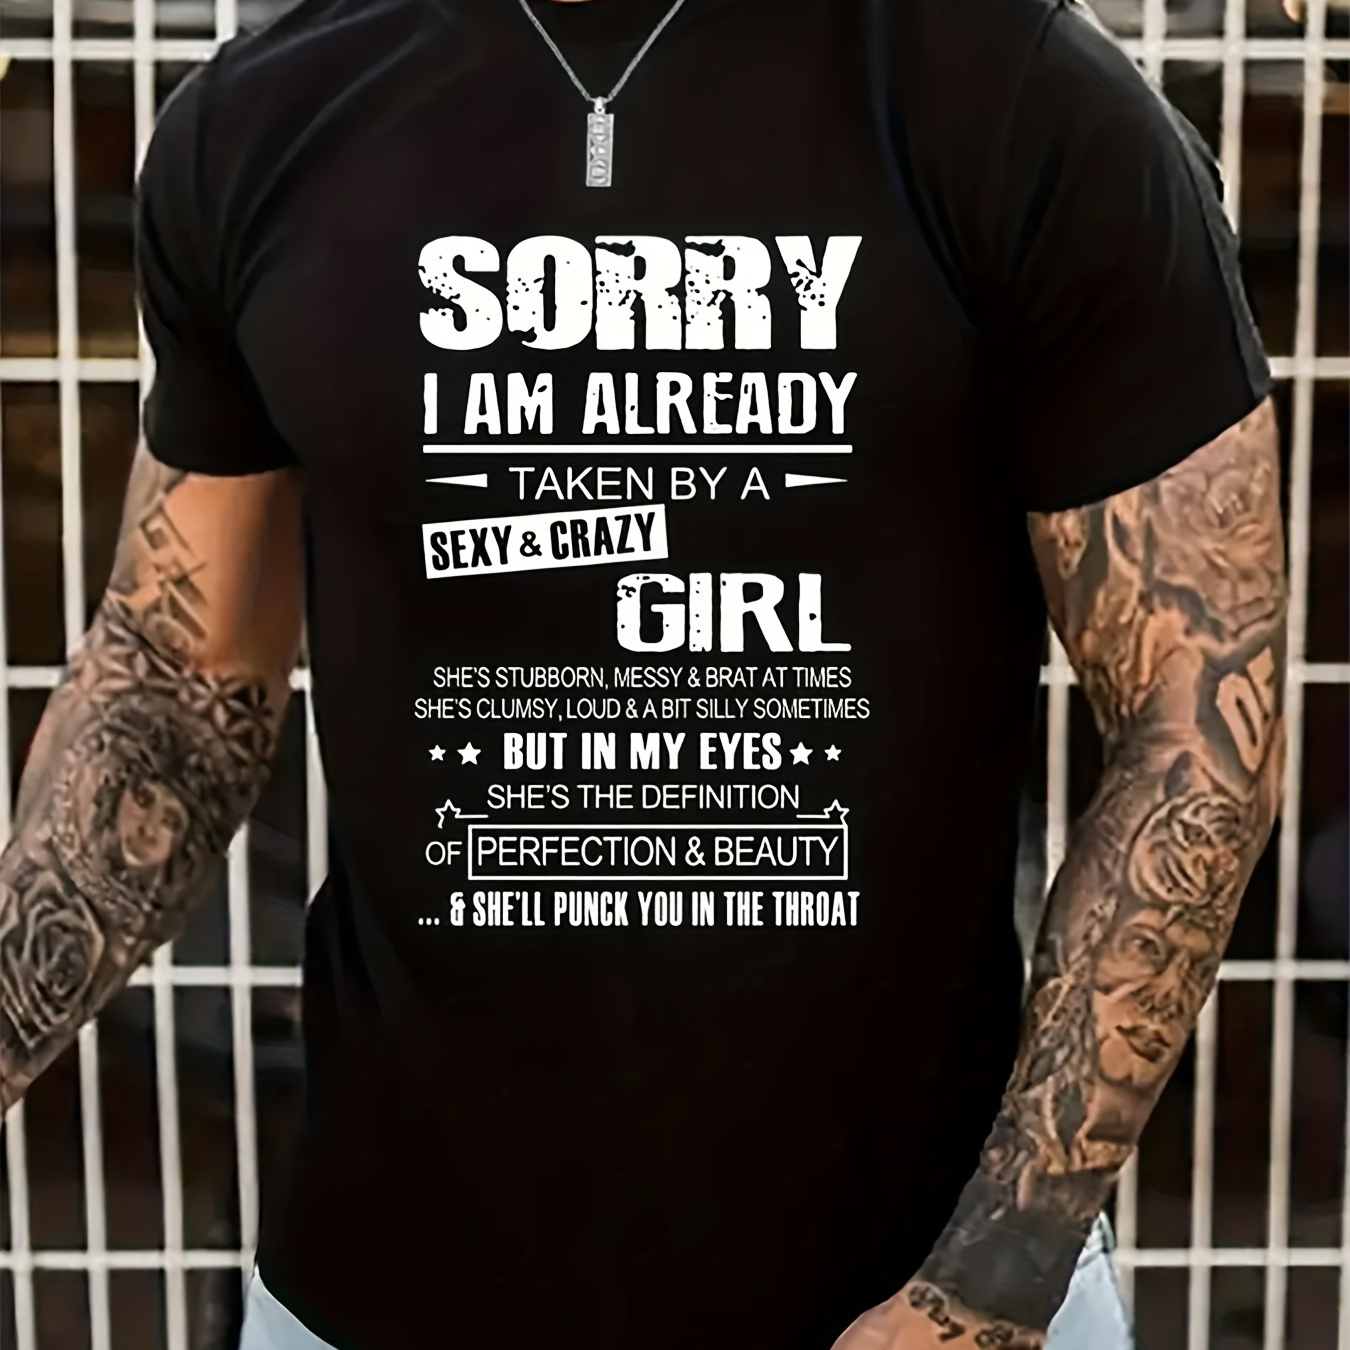 

'sorry I Am Already Taken By Sexy& Crazy Guy' Casual Round Neck T-shirts, Short Sleeves Comfortable Tops, Men's Clothing For Summer